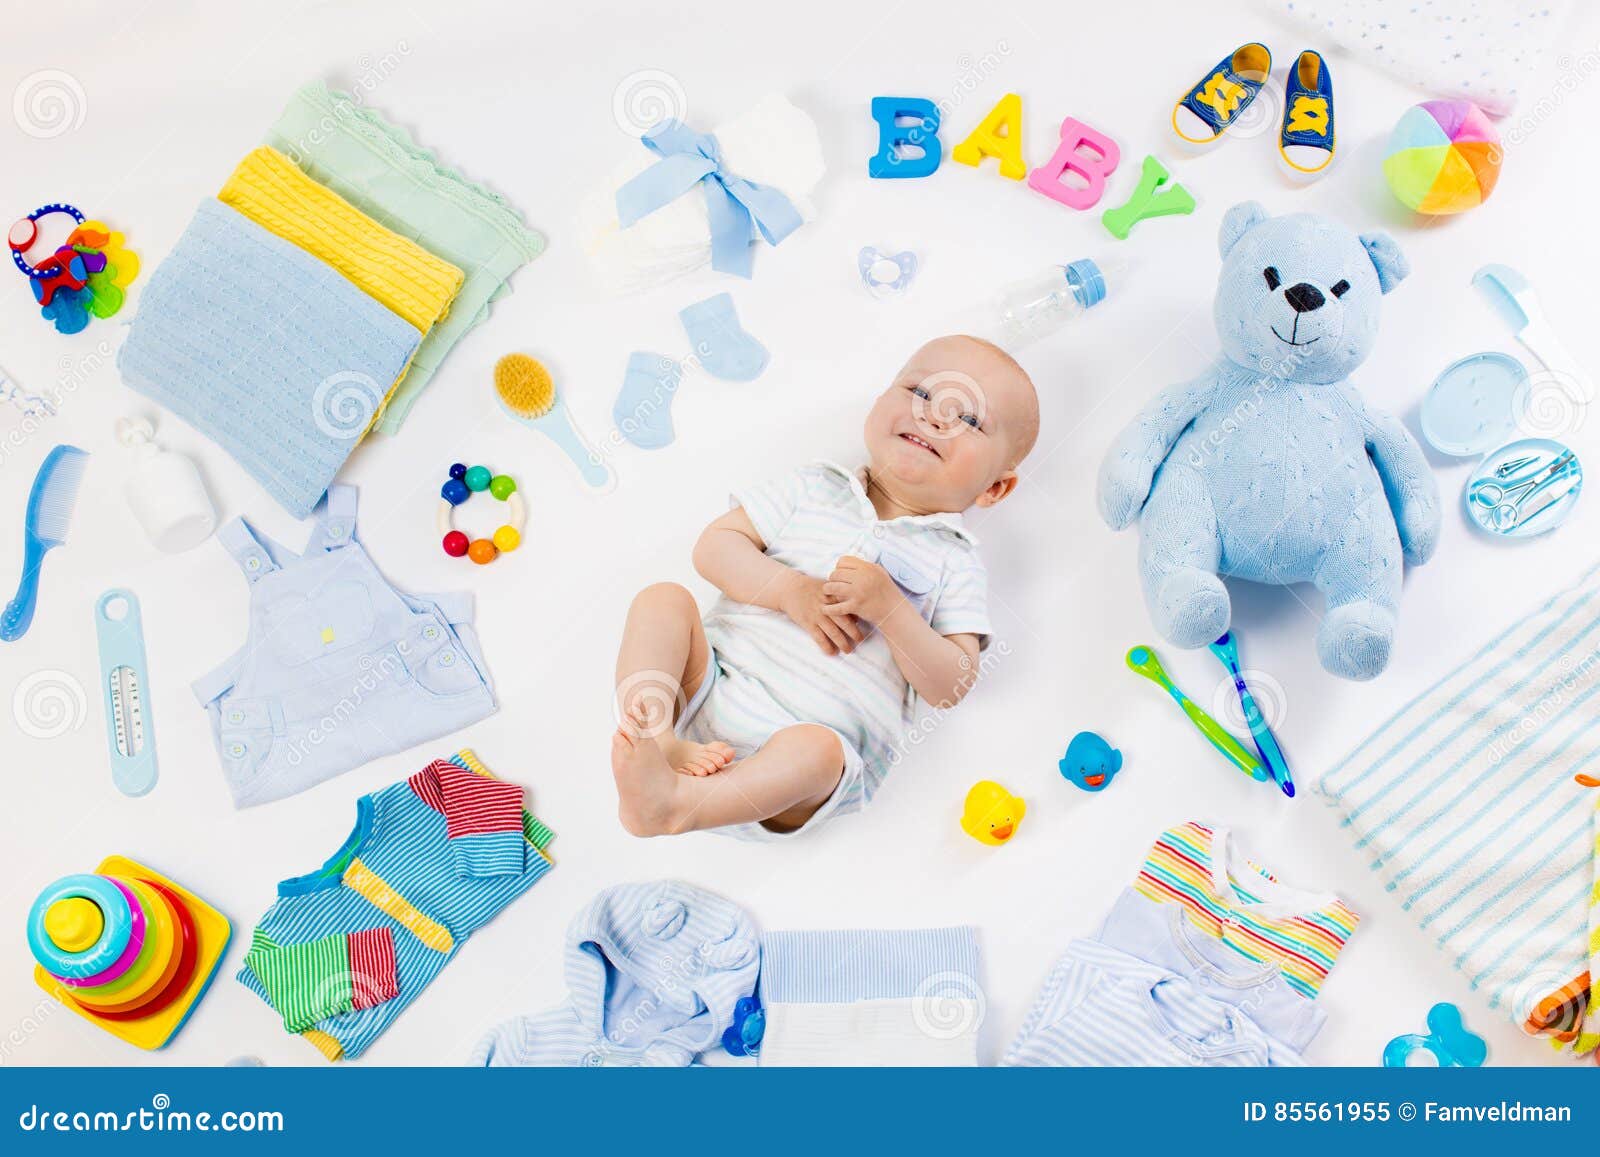 Baby with Clothing and Infant Care Items Stock Image - Image of gift ...